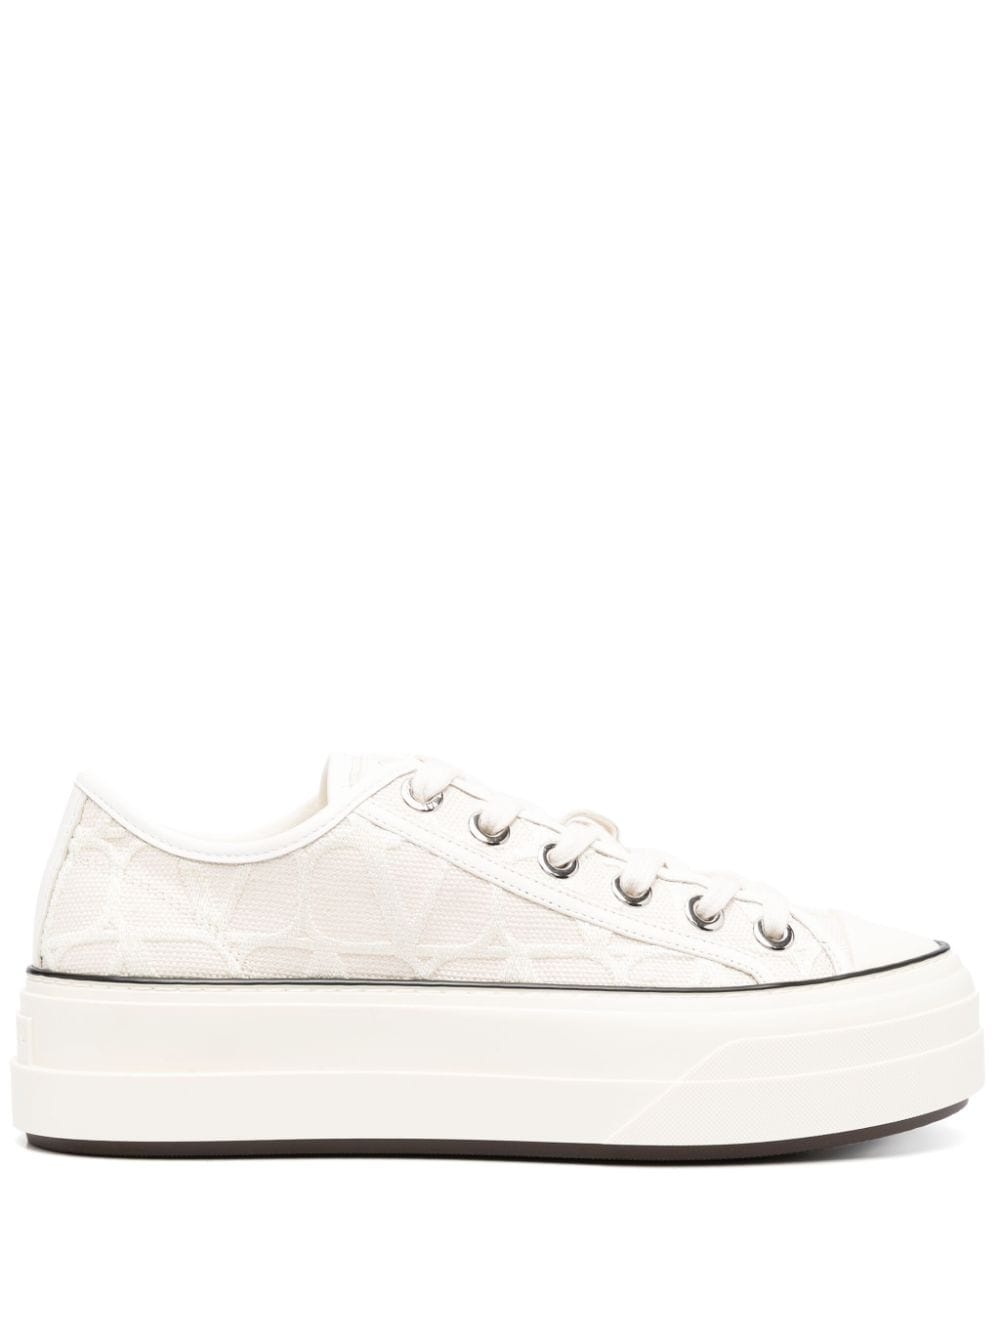 platform-sole lace-up sneakers - 1